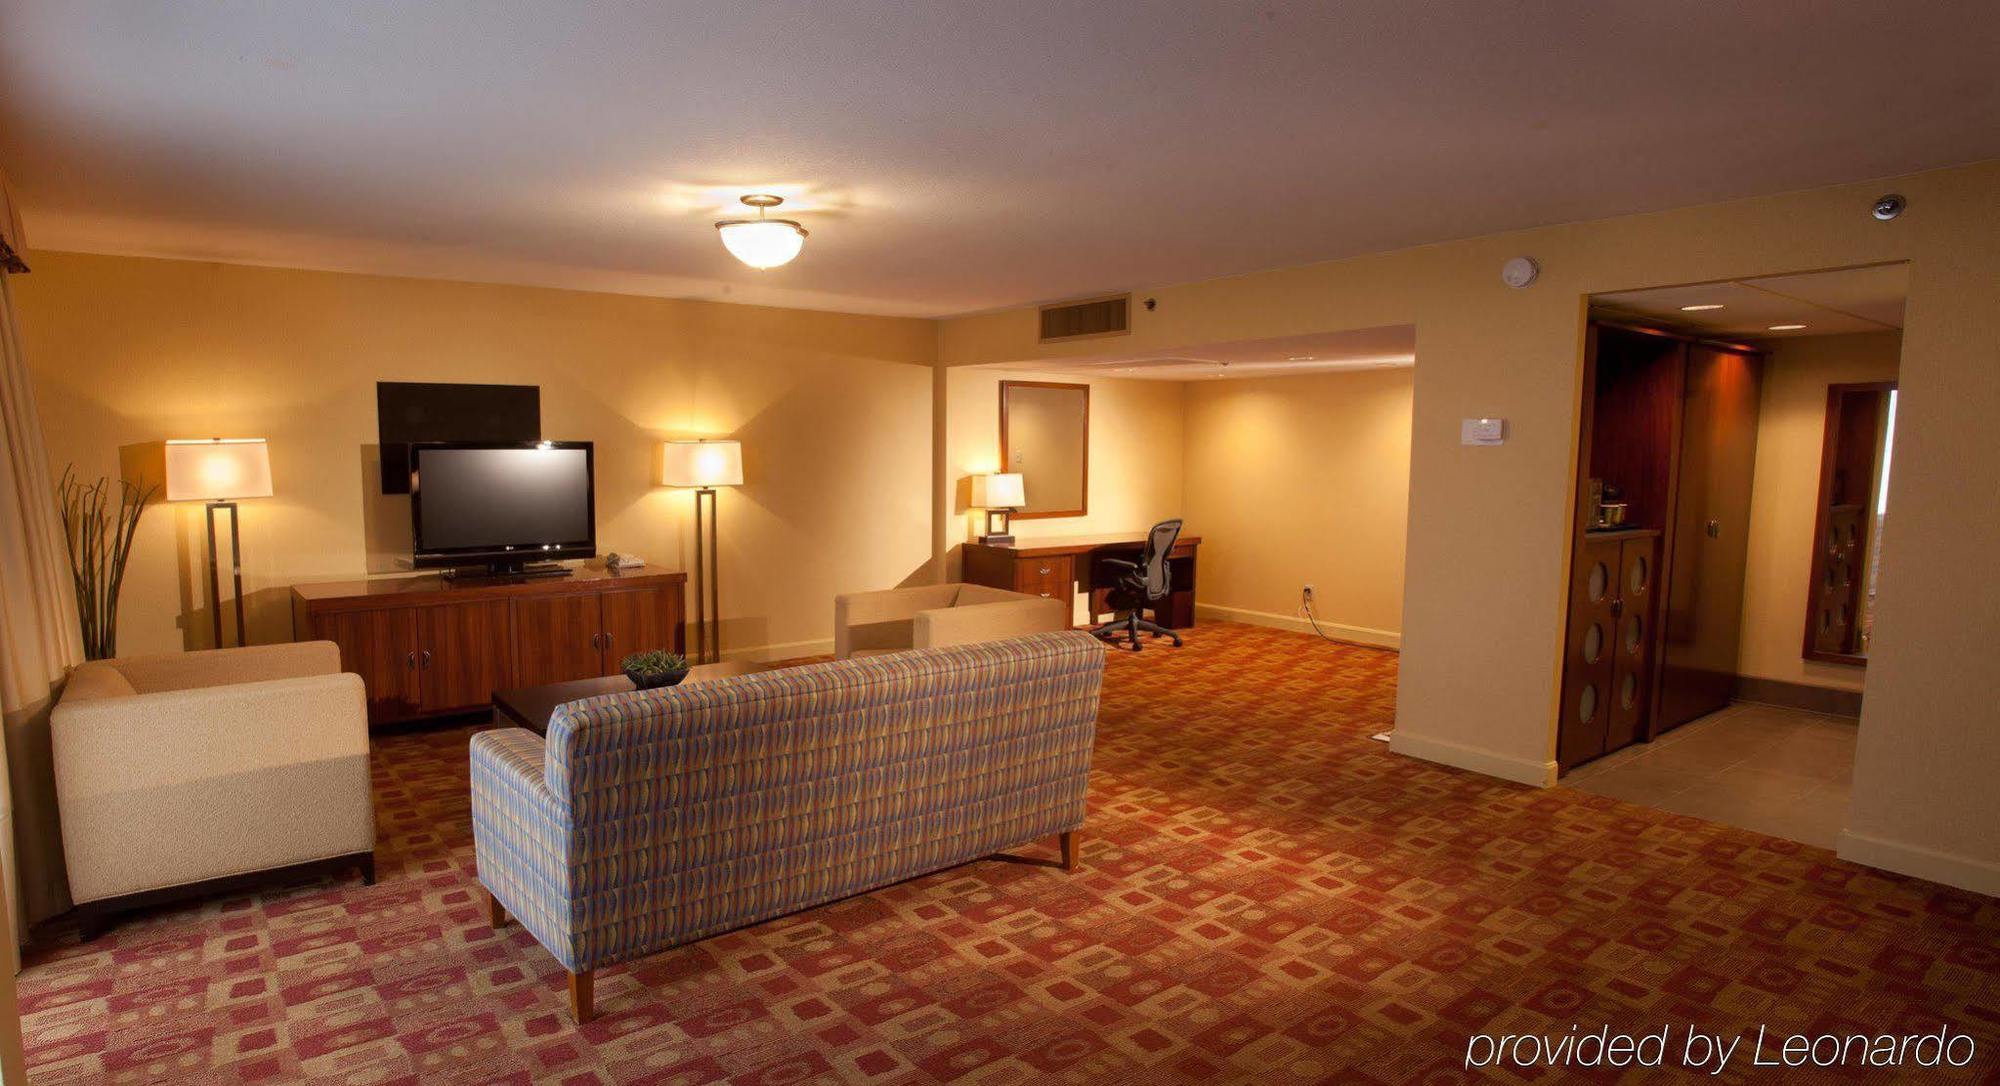 Doubletree By Hilton Dfw Airport North Hotel Irving Bilik gambar